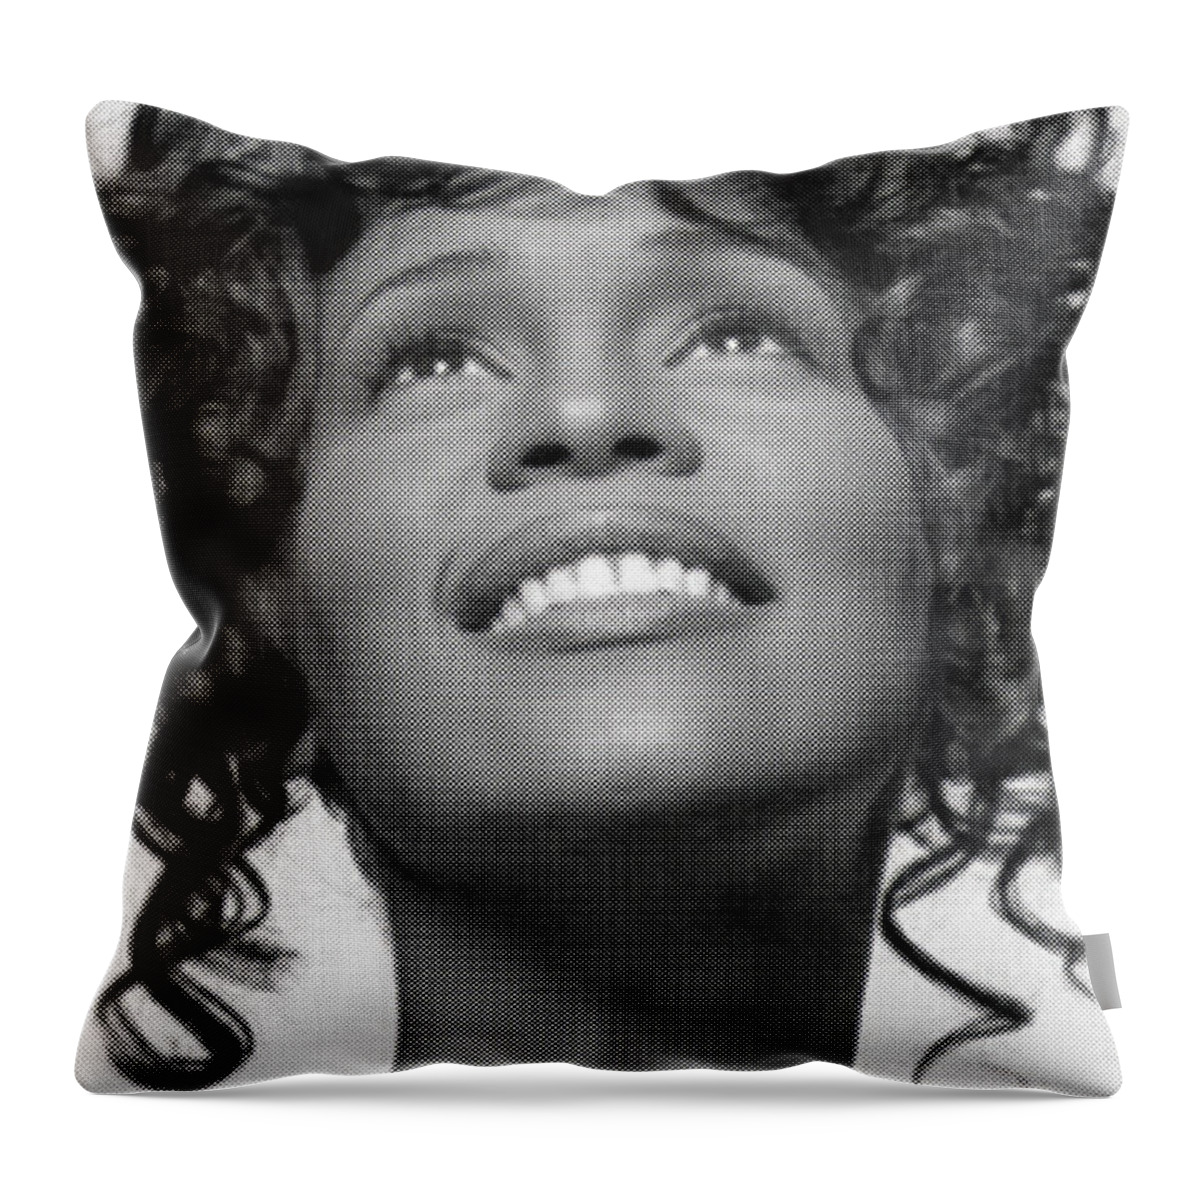 Hobby Throw Pillow featuring the digital art Hobby Dance Whitney Houston by Towery Hill